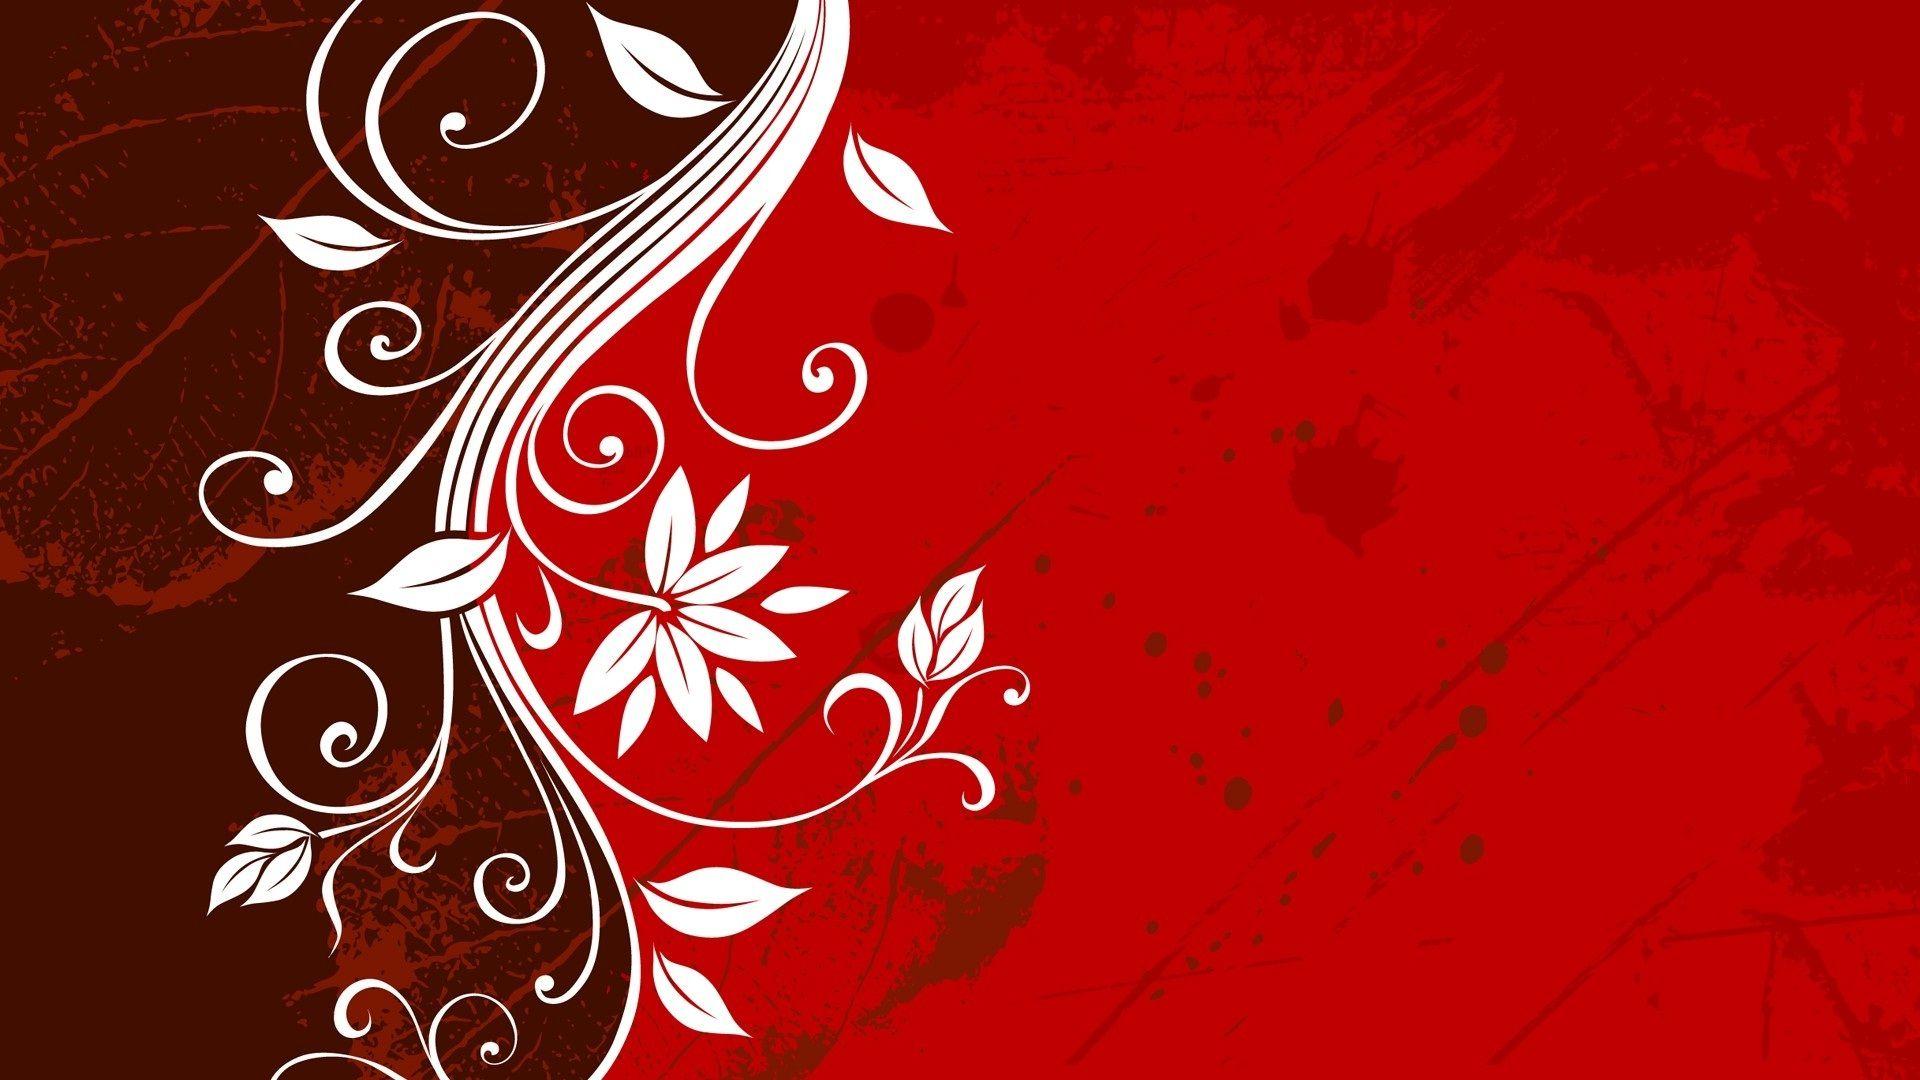 Awesome flowery design dark red background wallpaper. HD